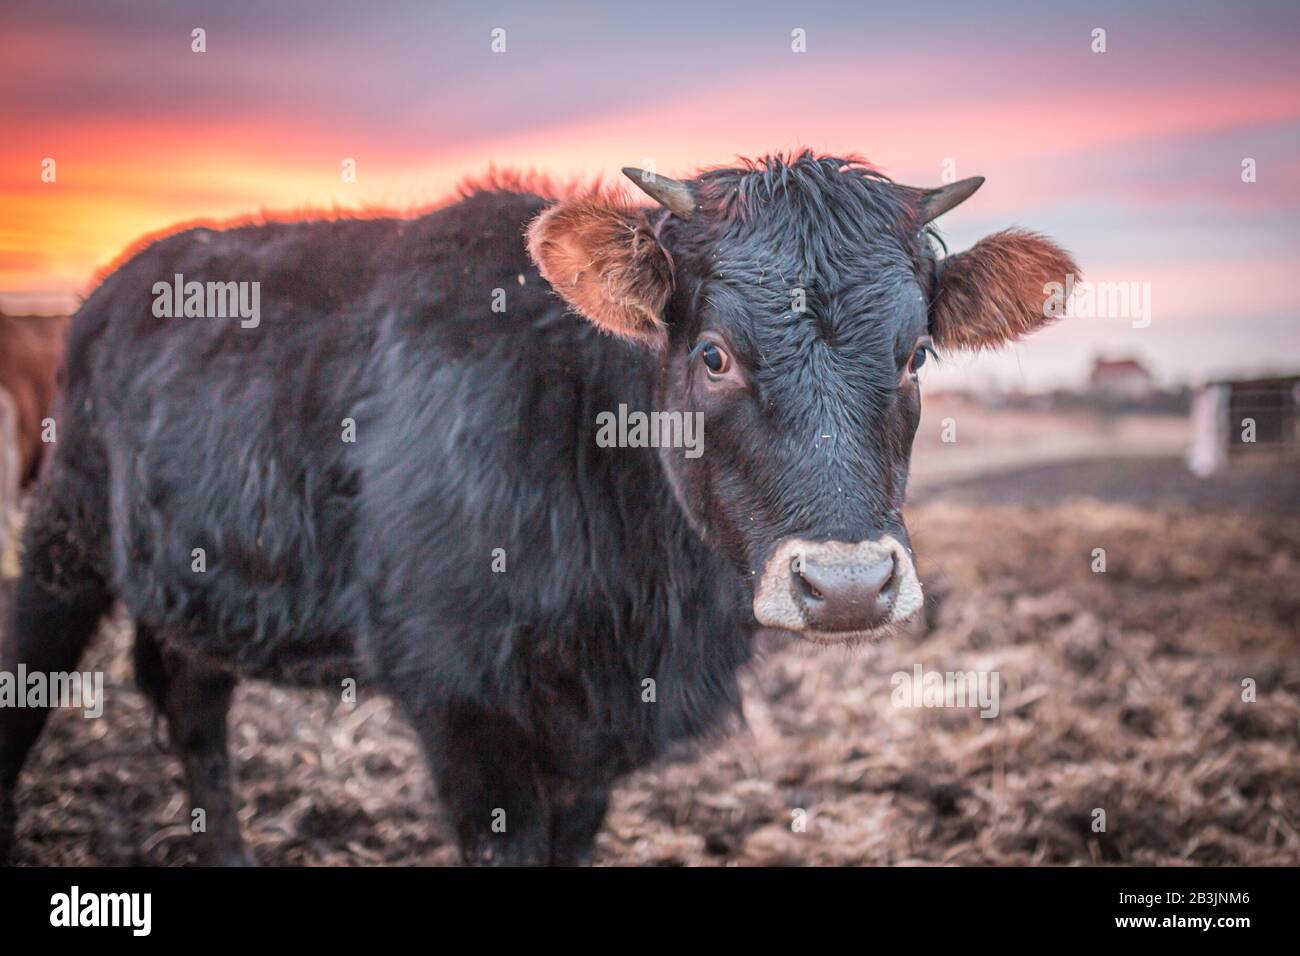 Happy cow or a bull on a muddy meadow during sunset in winter. Close up photo of black cow. Stock Photo